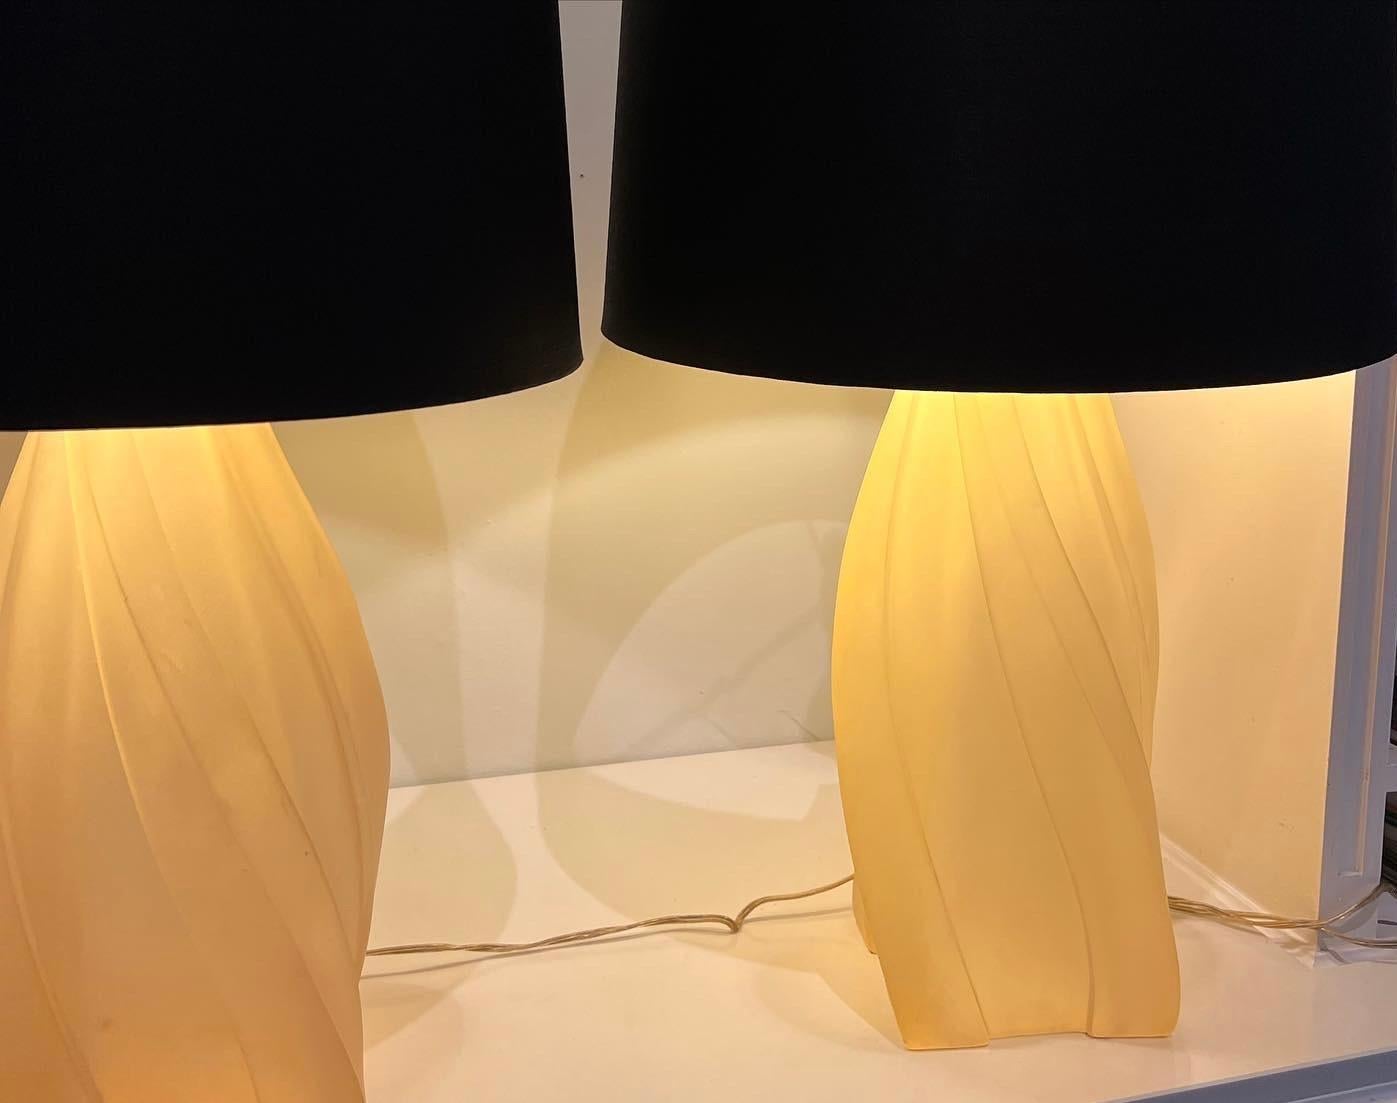 A phenomenal pair of lamps signed and designed by Paolo Gucci for Gucci. The pair are made of molded resin and look spectacular when lit... the silk shades have a gold foil inside which gives the pieces a wonderful presence... Unique and rare to